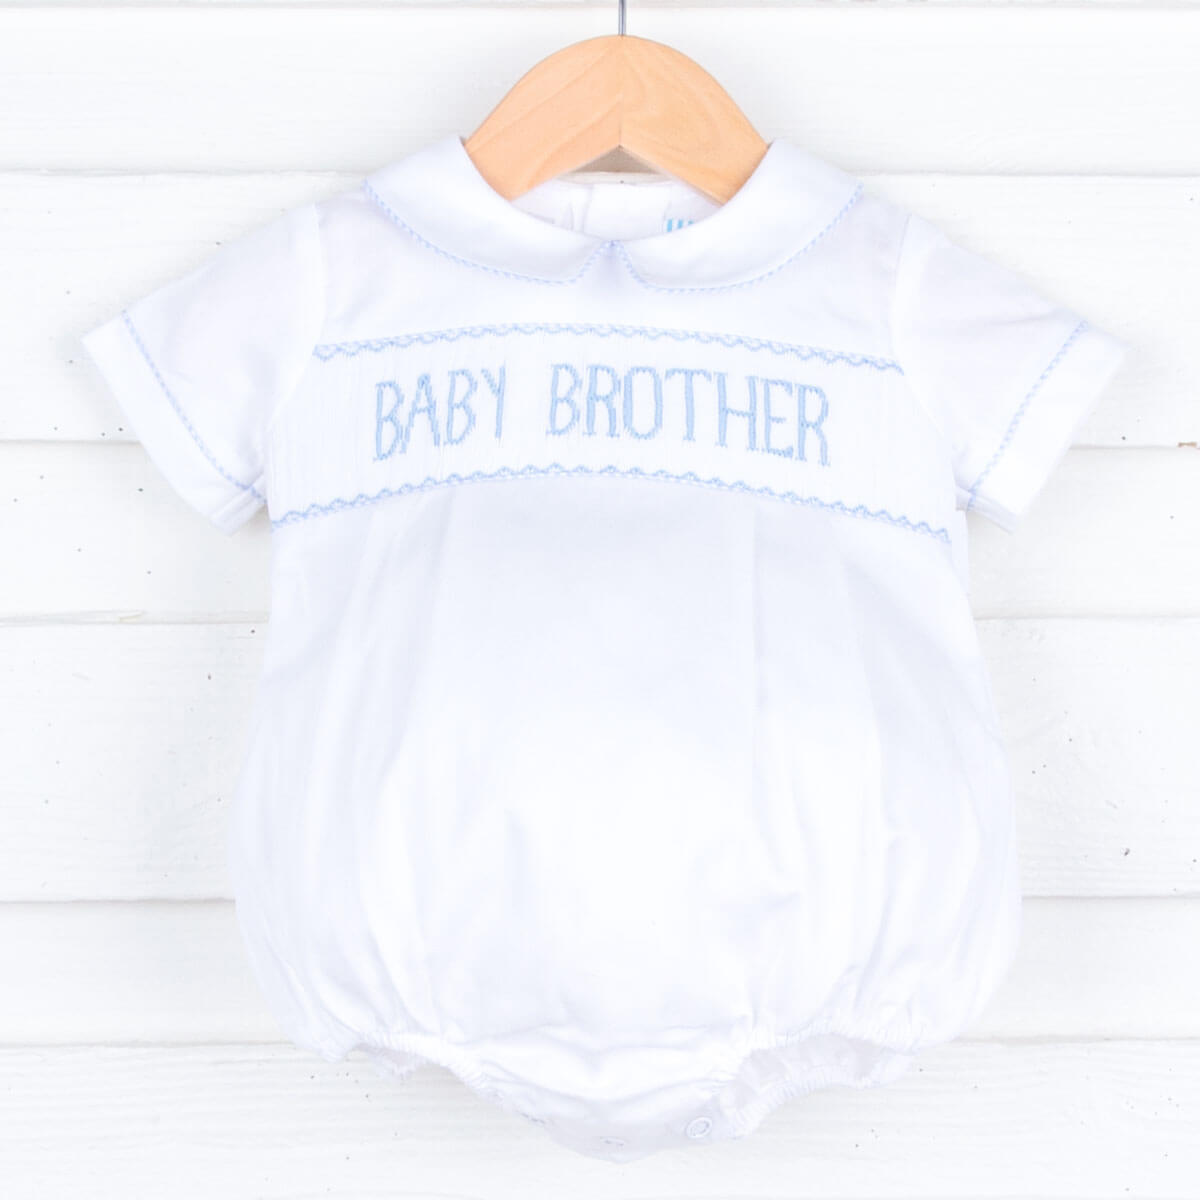 Baby Brother Smocked Bubble White Pique